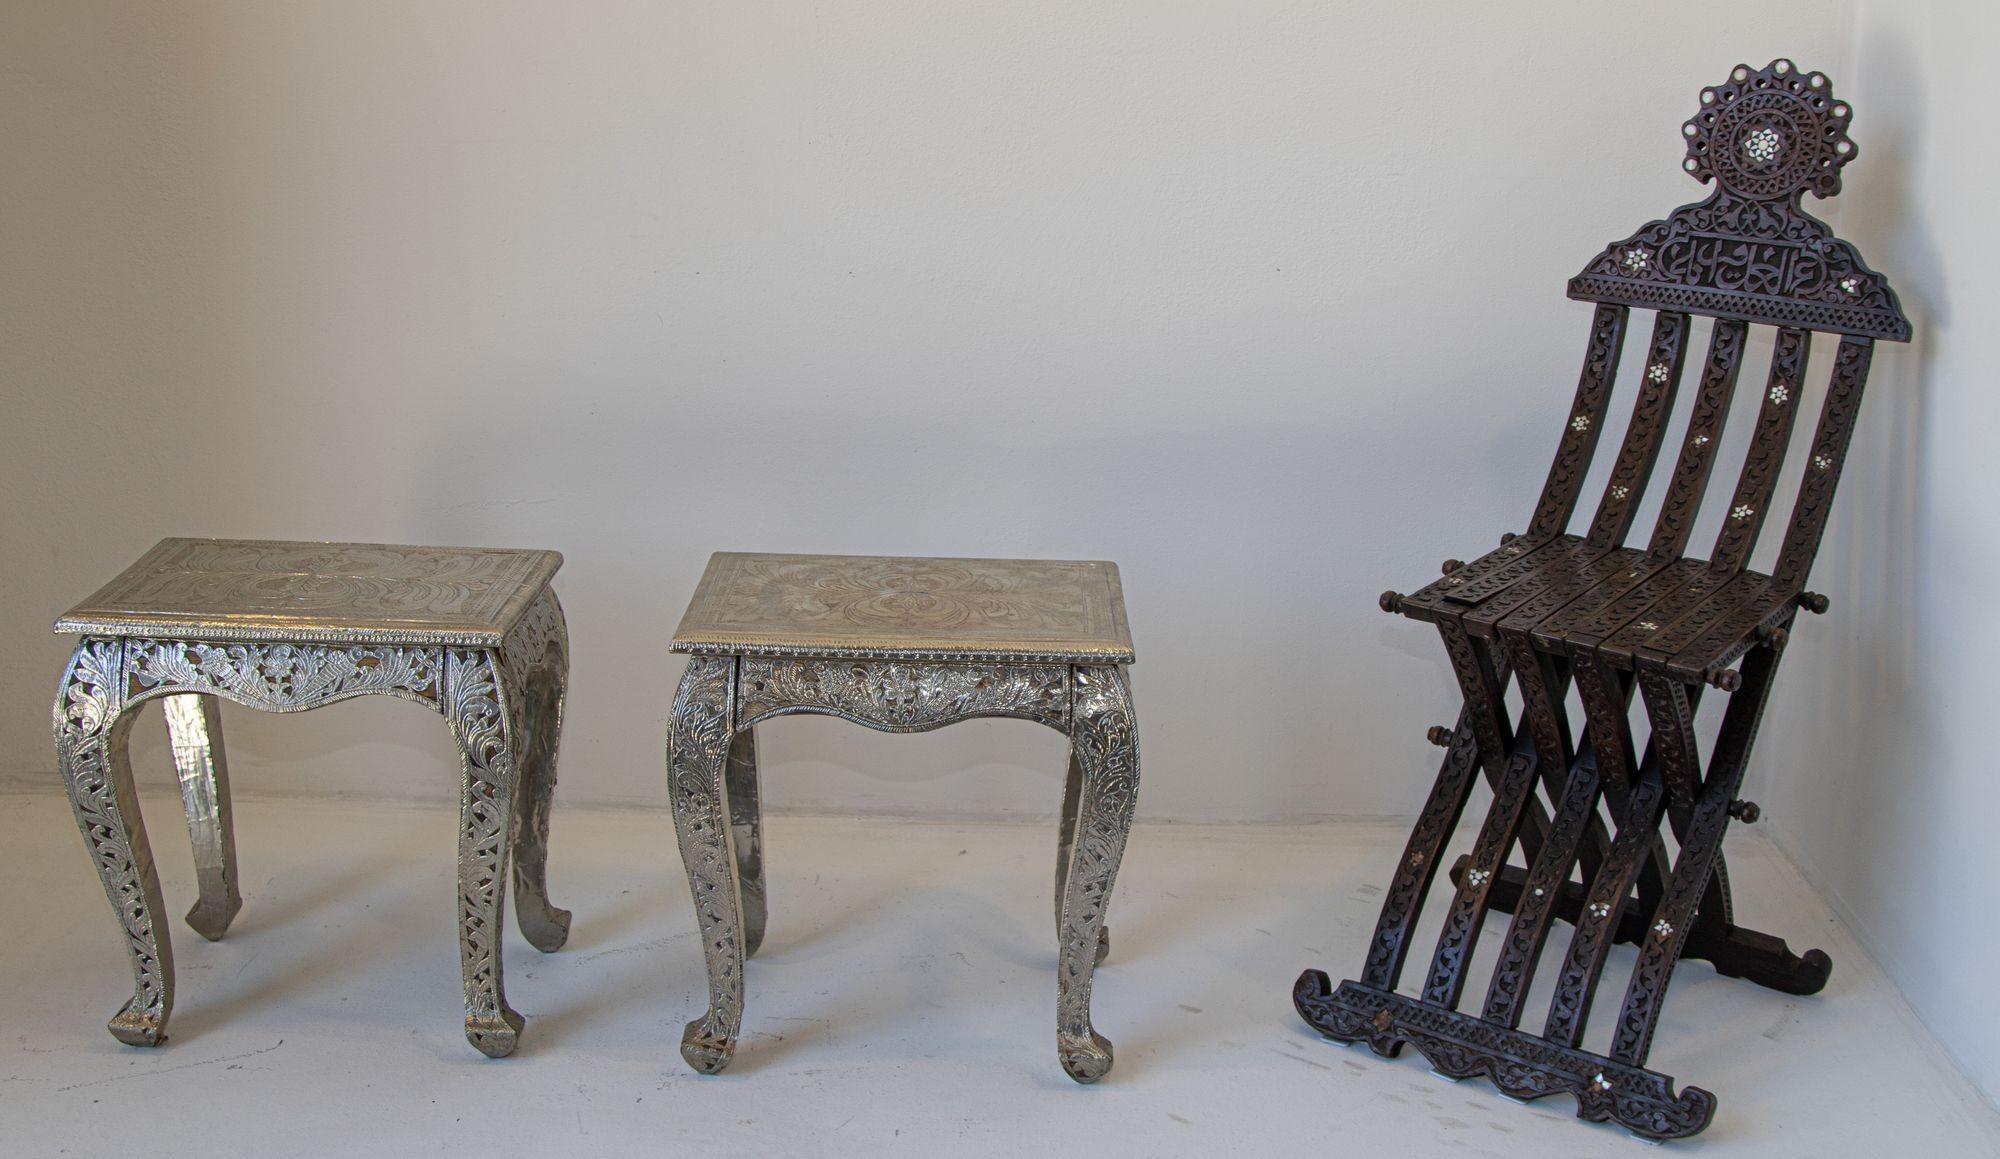 Anglo Indian night stand silver clad a pair.
Vintage Anglo-Indian silver wrapped clad side low tables, night stands or occasional table with a drawer.
Anglo Raj side low table hand-hammered with silver metal repousse work over wood very nice and